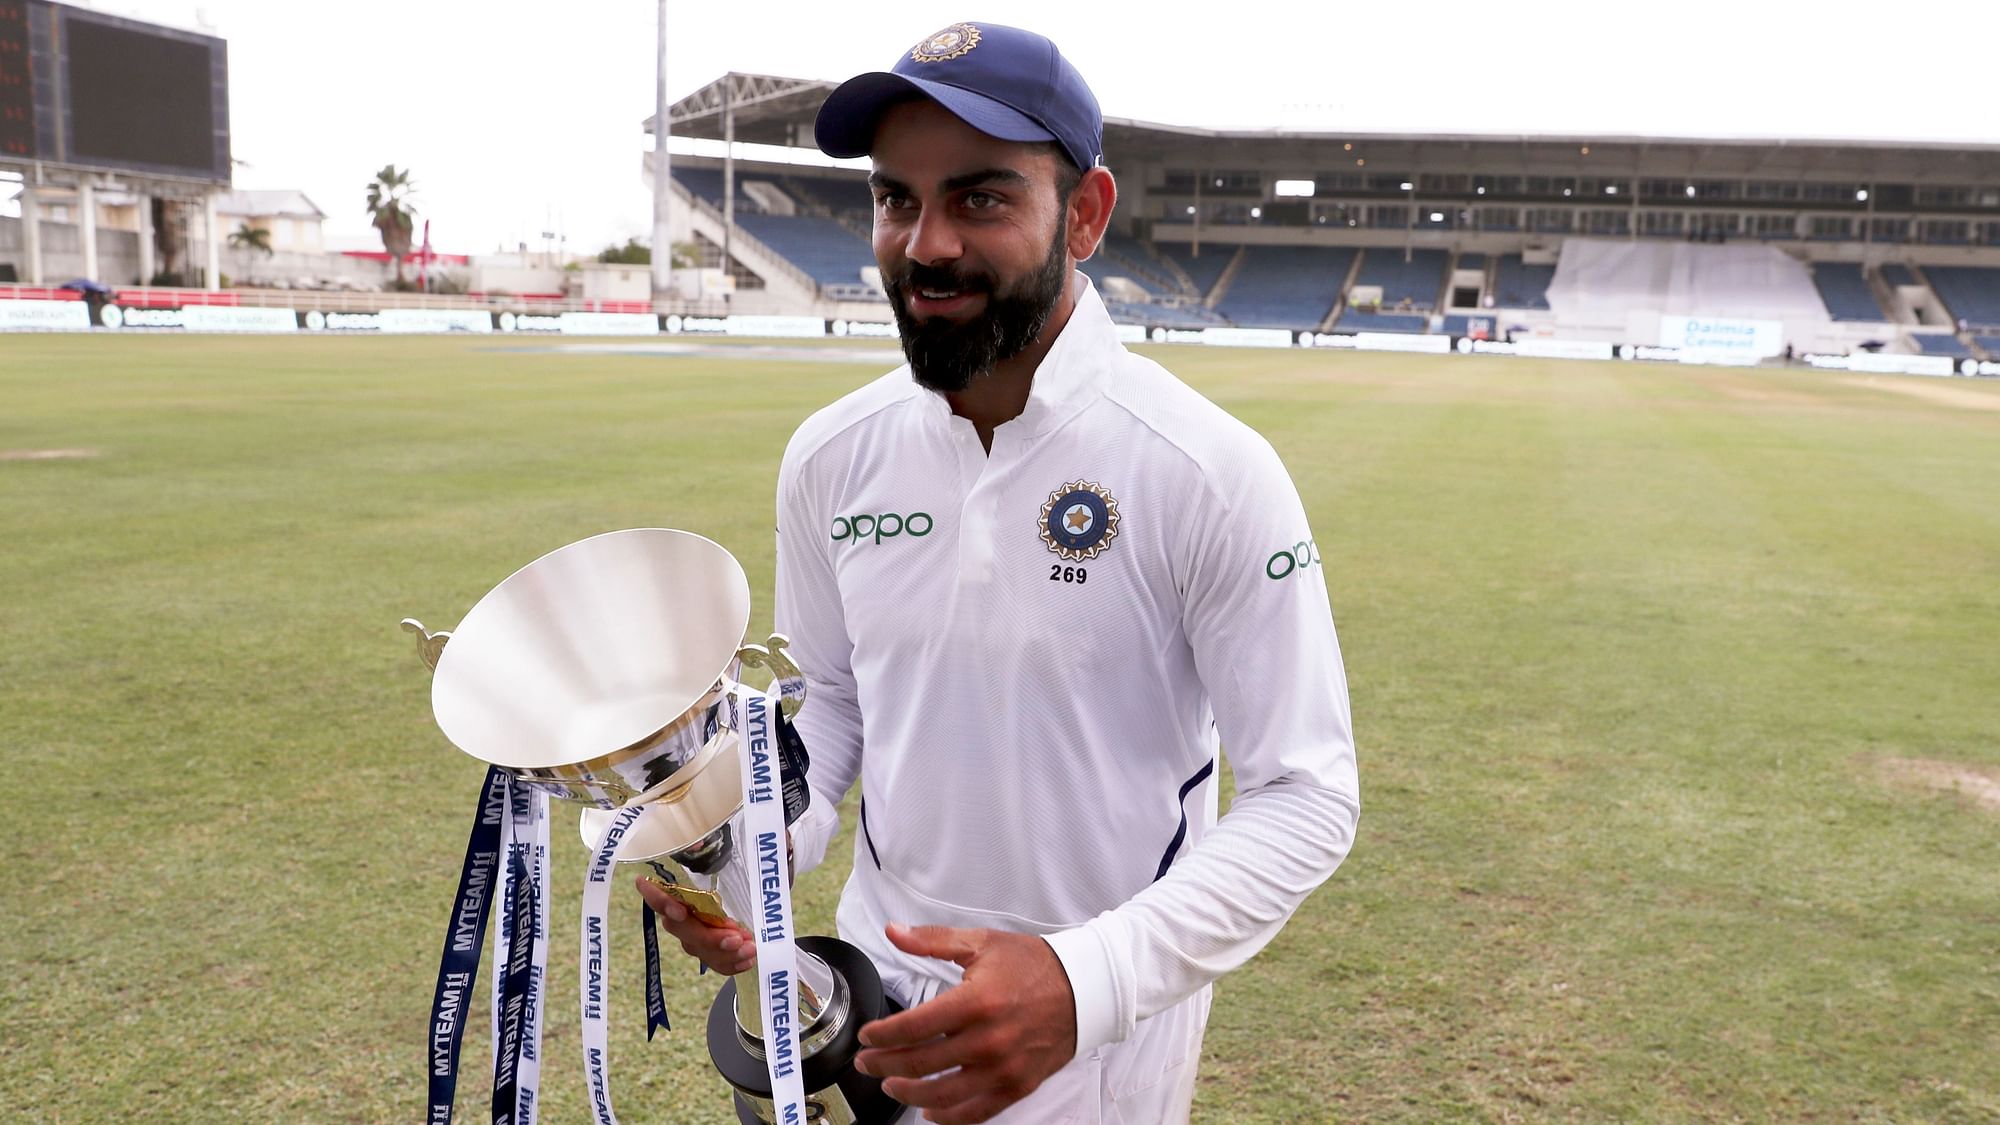 Virat Kohli says it was the absence of fear or respect for him in the opposition’s eye that has forced him to change his work ethic.